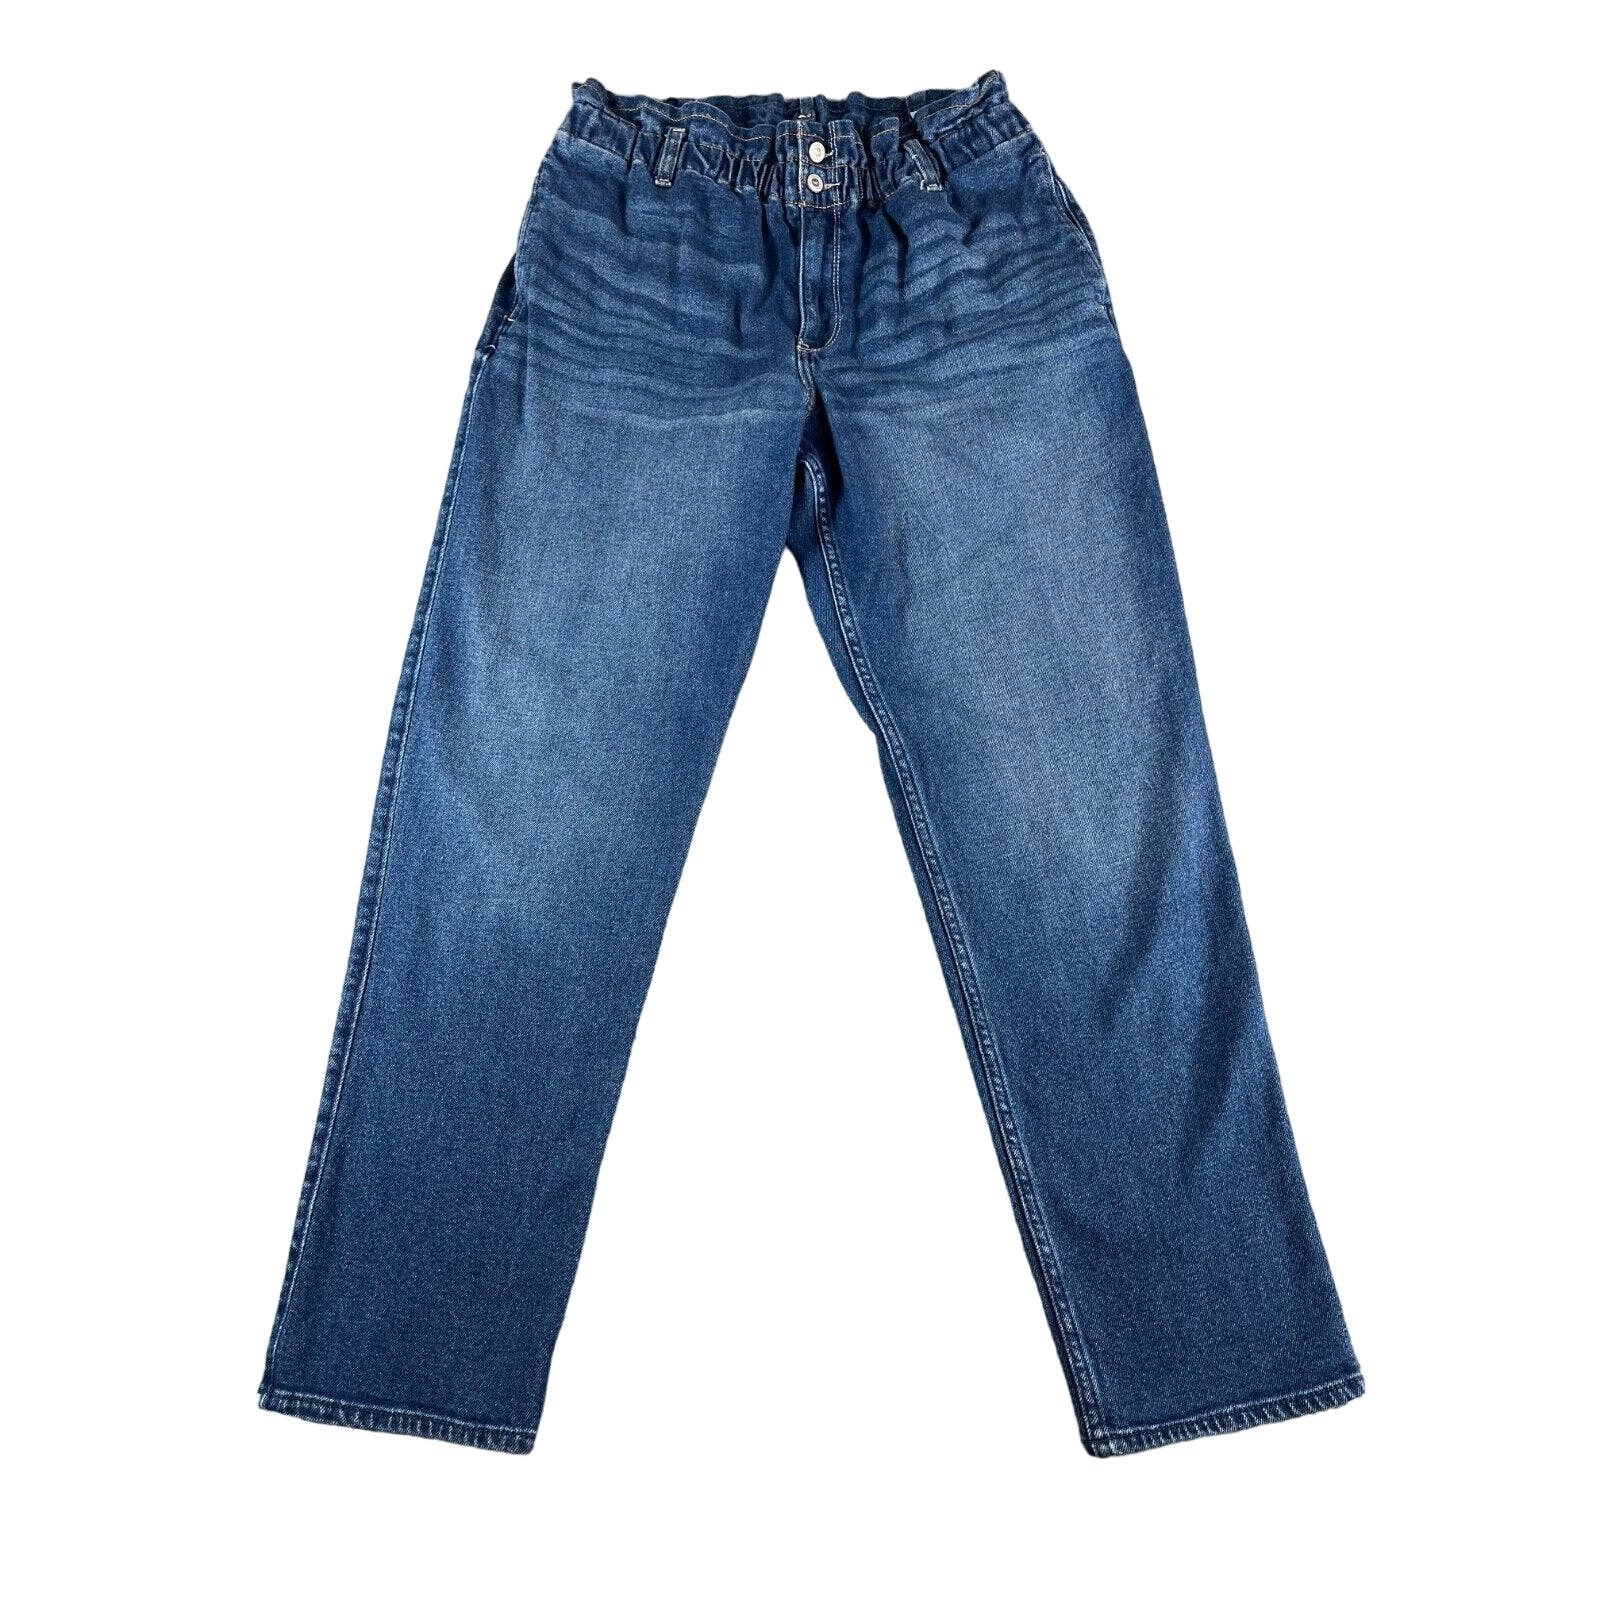 Exclusive Hollister Jeans Womens 13R (31 x 27) Blue Denim Paperbag Ultra High Rise Mom iPYR1tKt1 just buy it